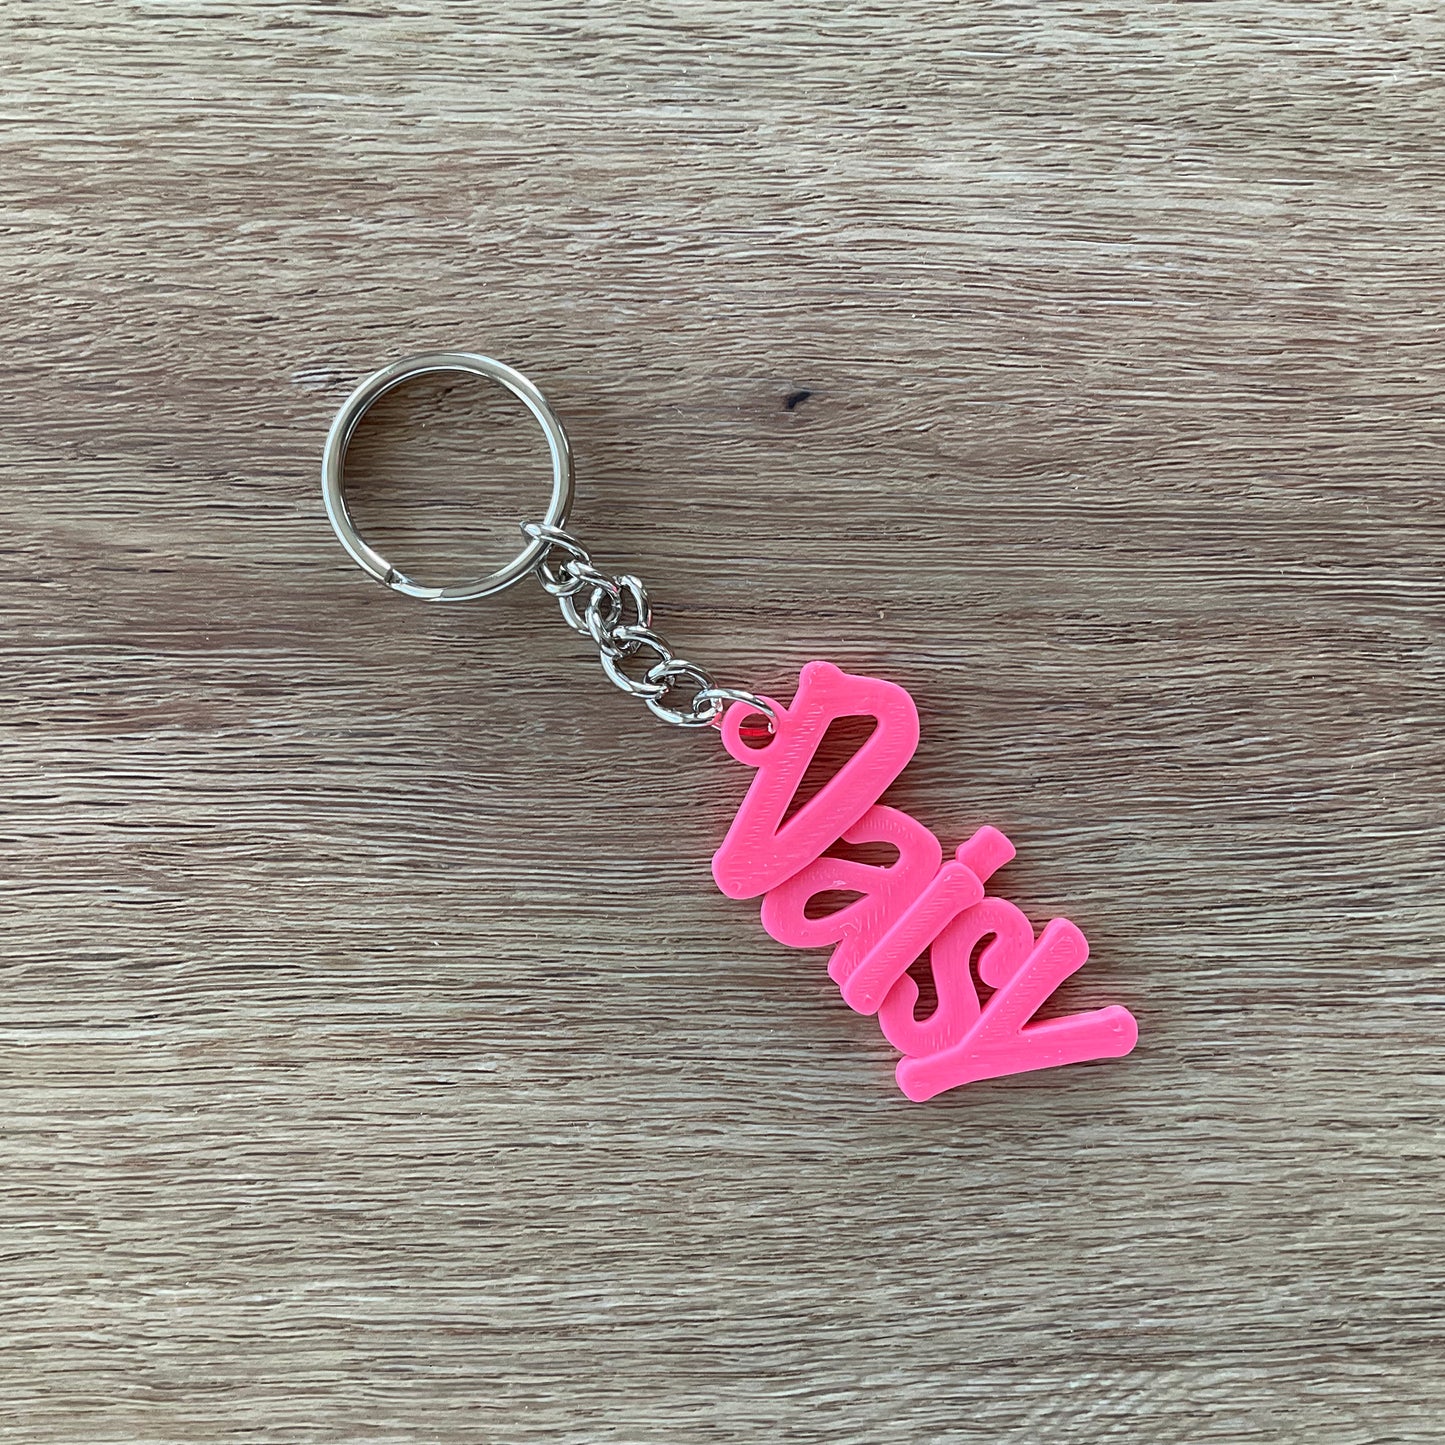 A sample image of the pink keychain.